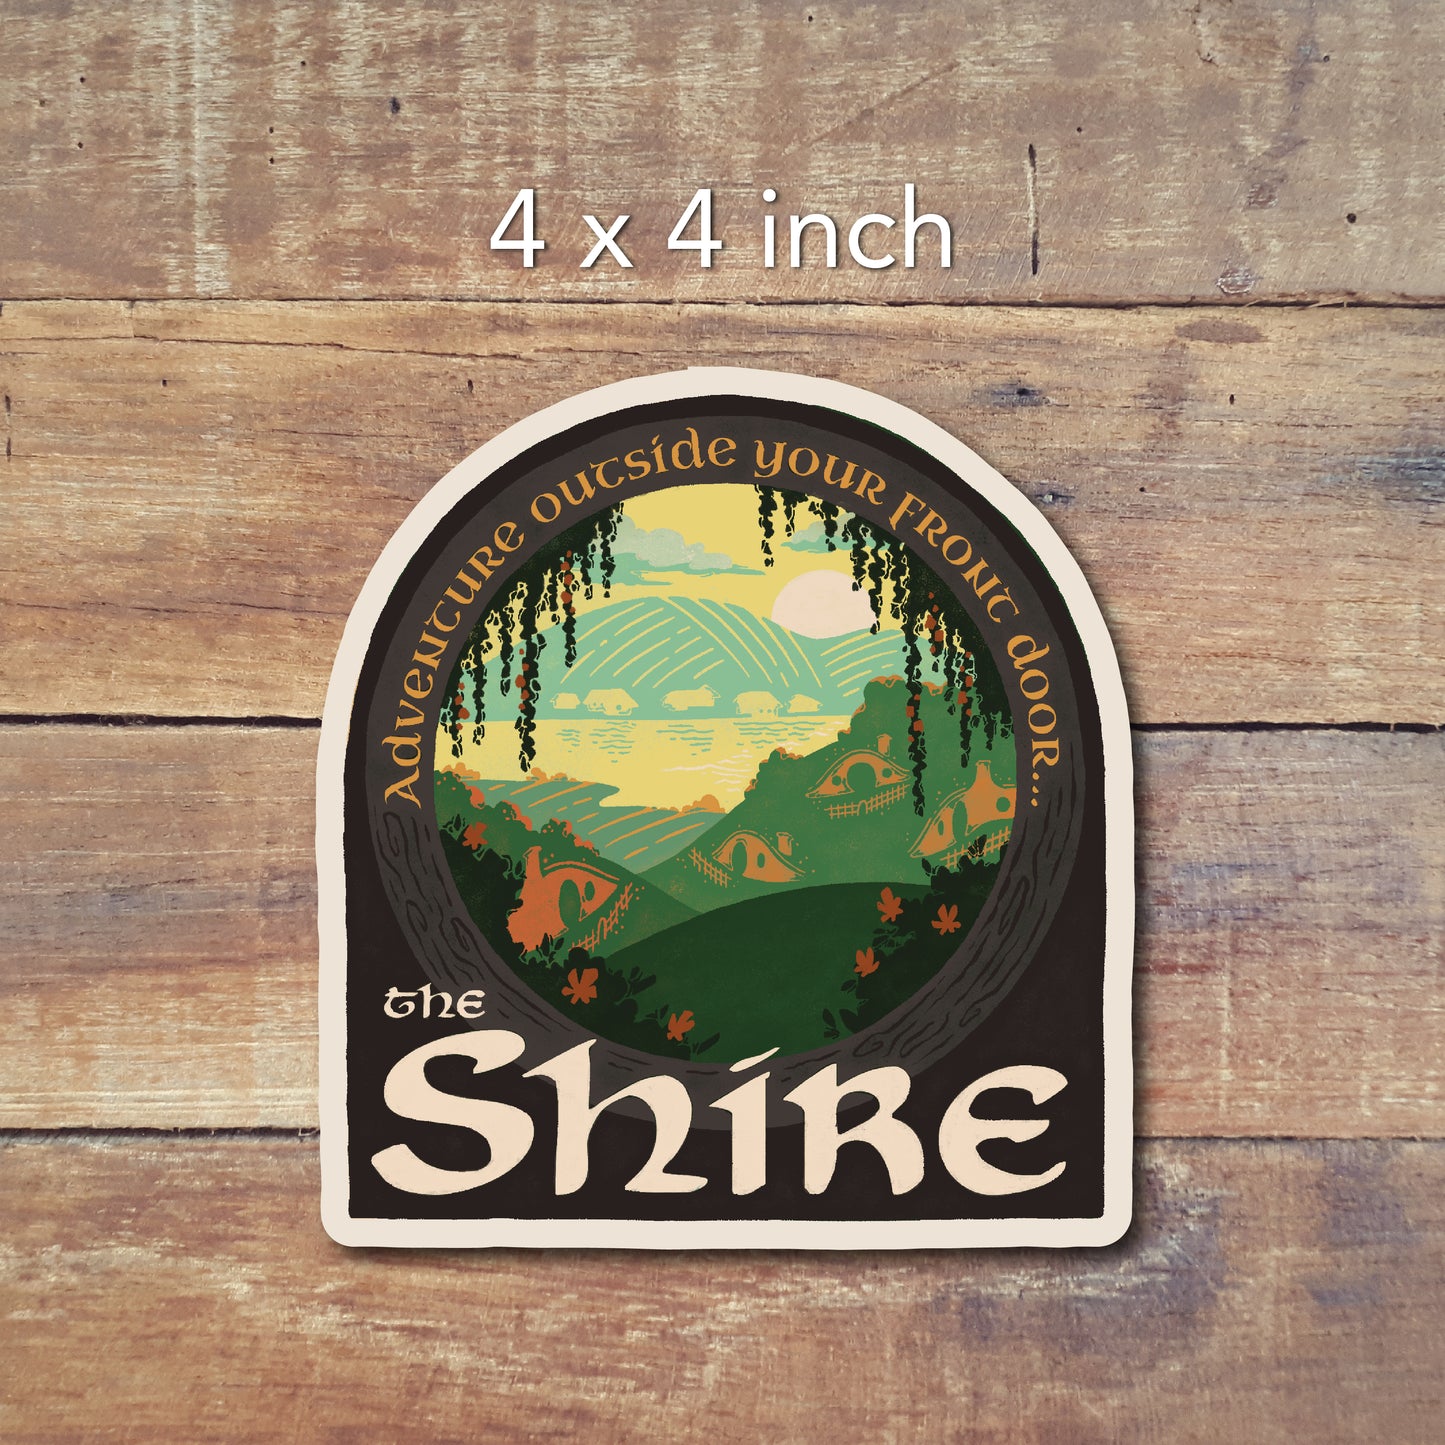 The Shire || Travel Sticker Series